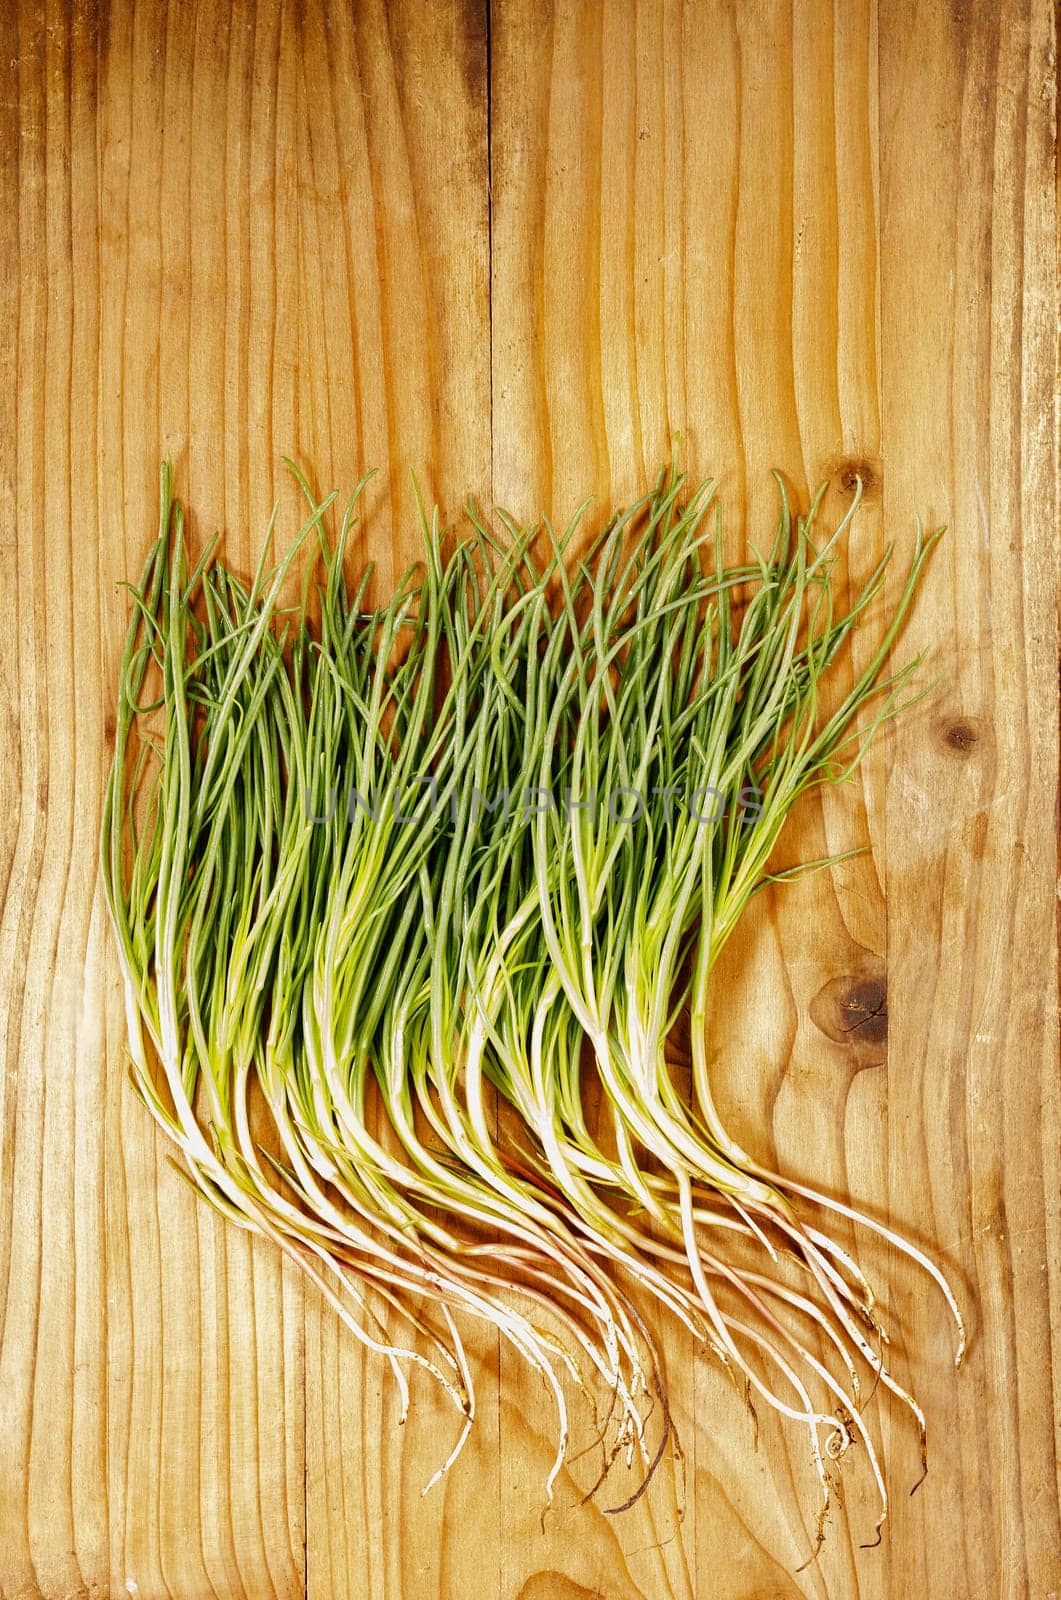 Bunch of agretti -salsola soda or opposite -leaved saltwort -on wooden table ,fresh uncooked green leaves